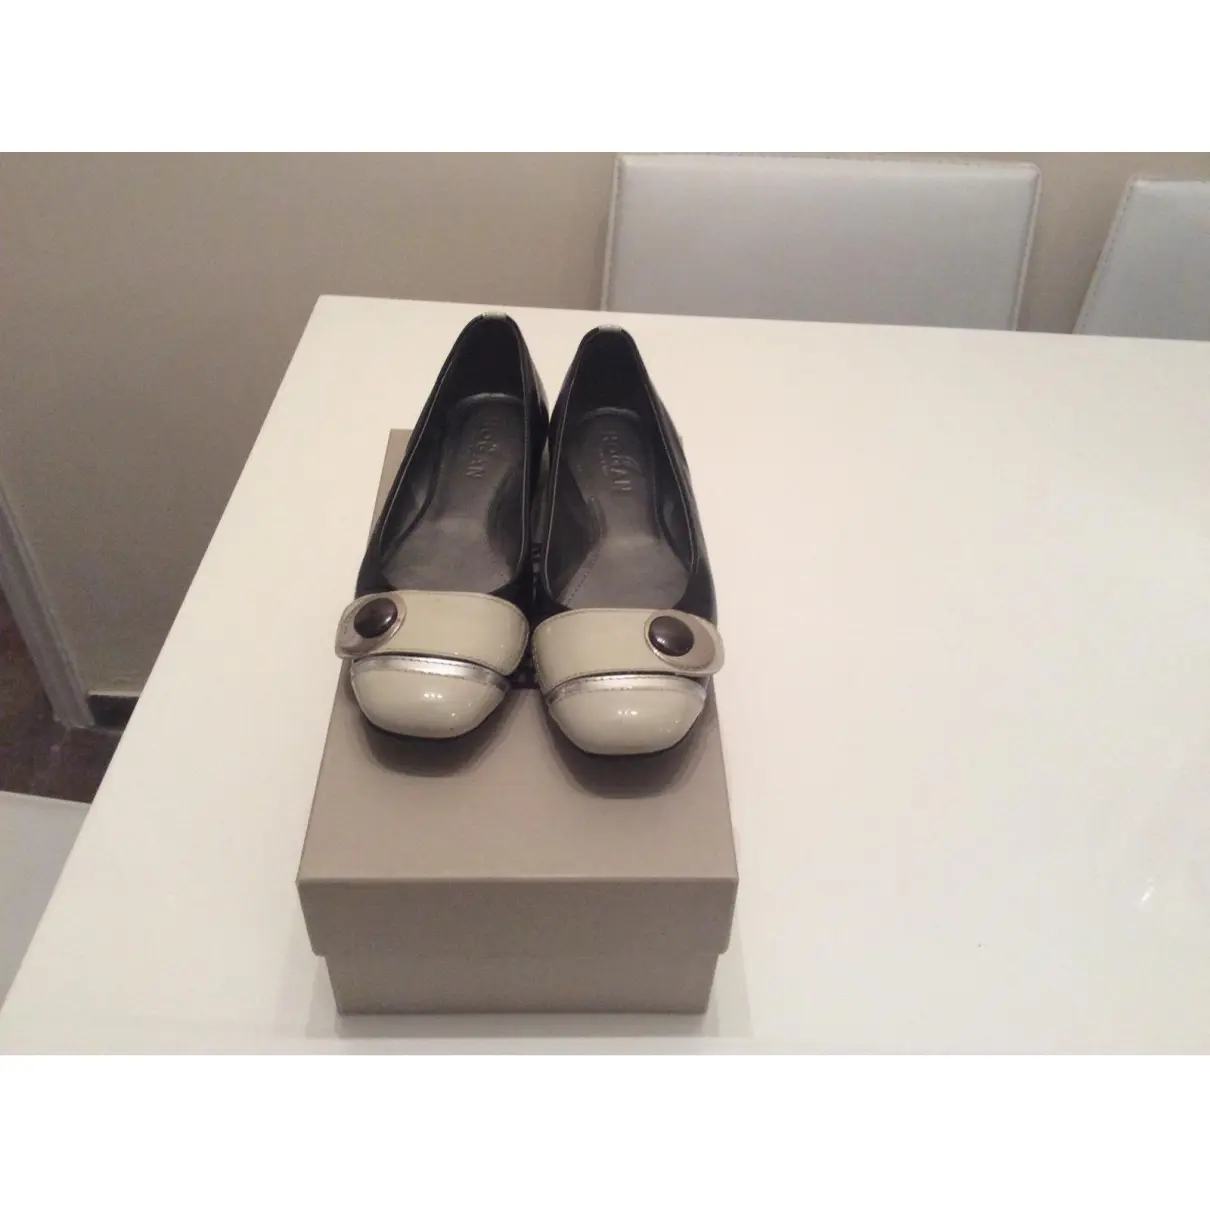 Hogan Leather flats for sale